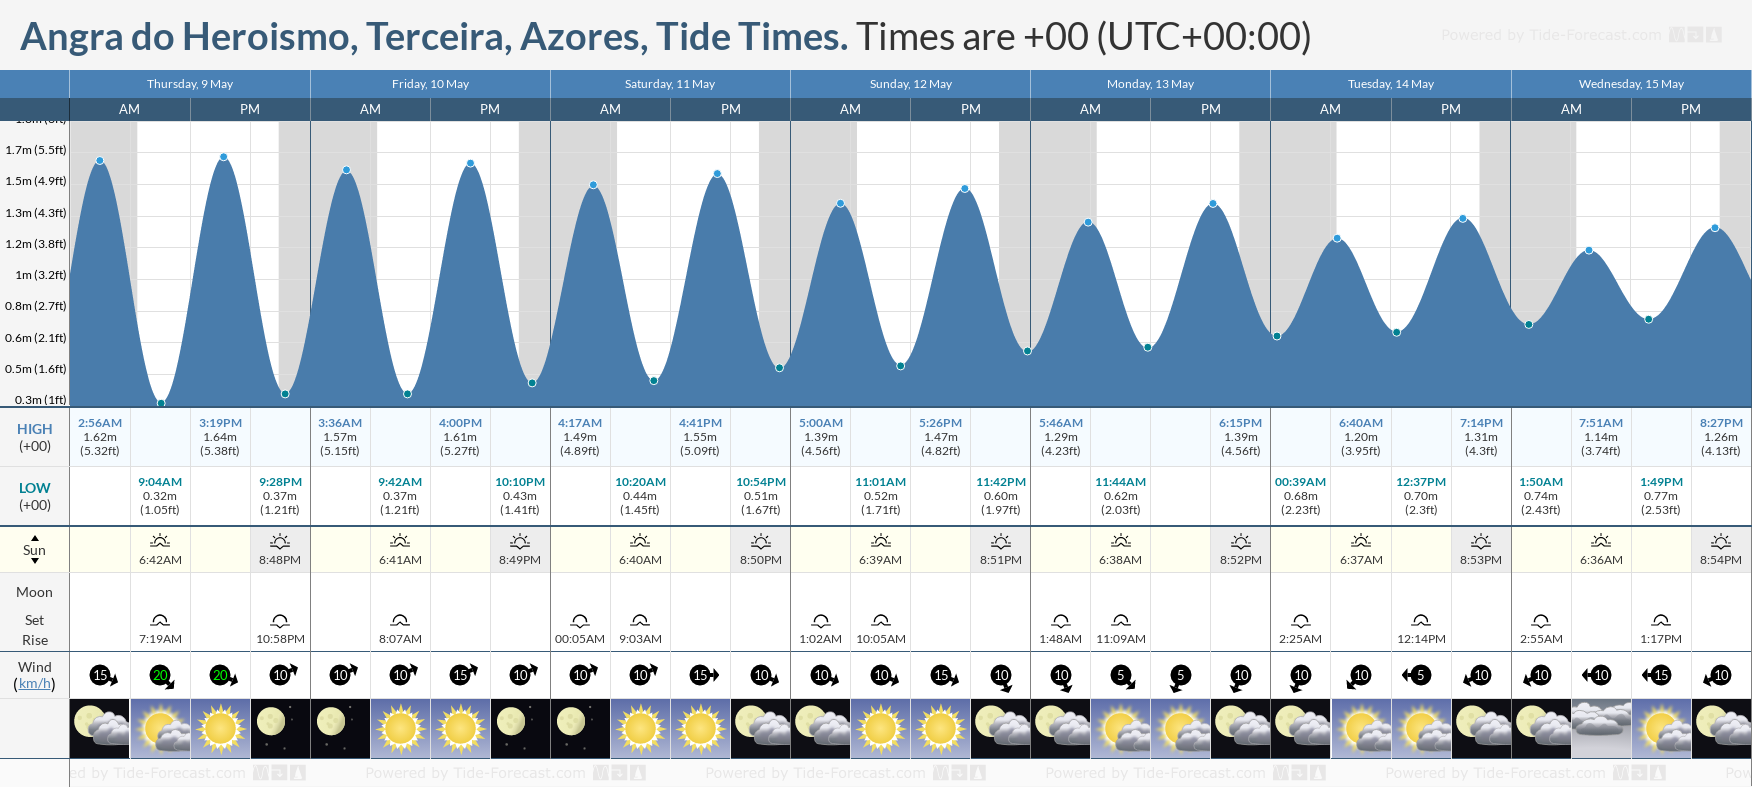 Angra do Heroismo, Terceira, Azores Tide Chart including high and low tide tide times for the next 7 days